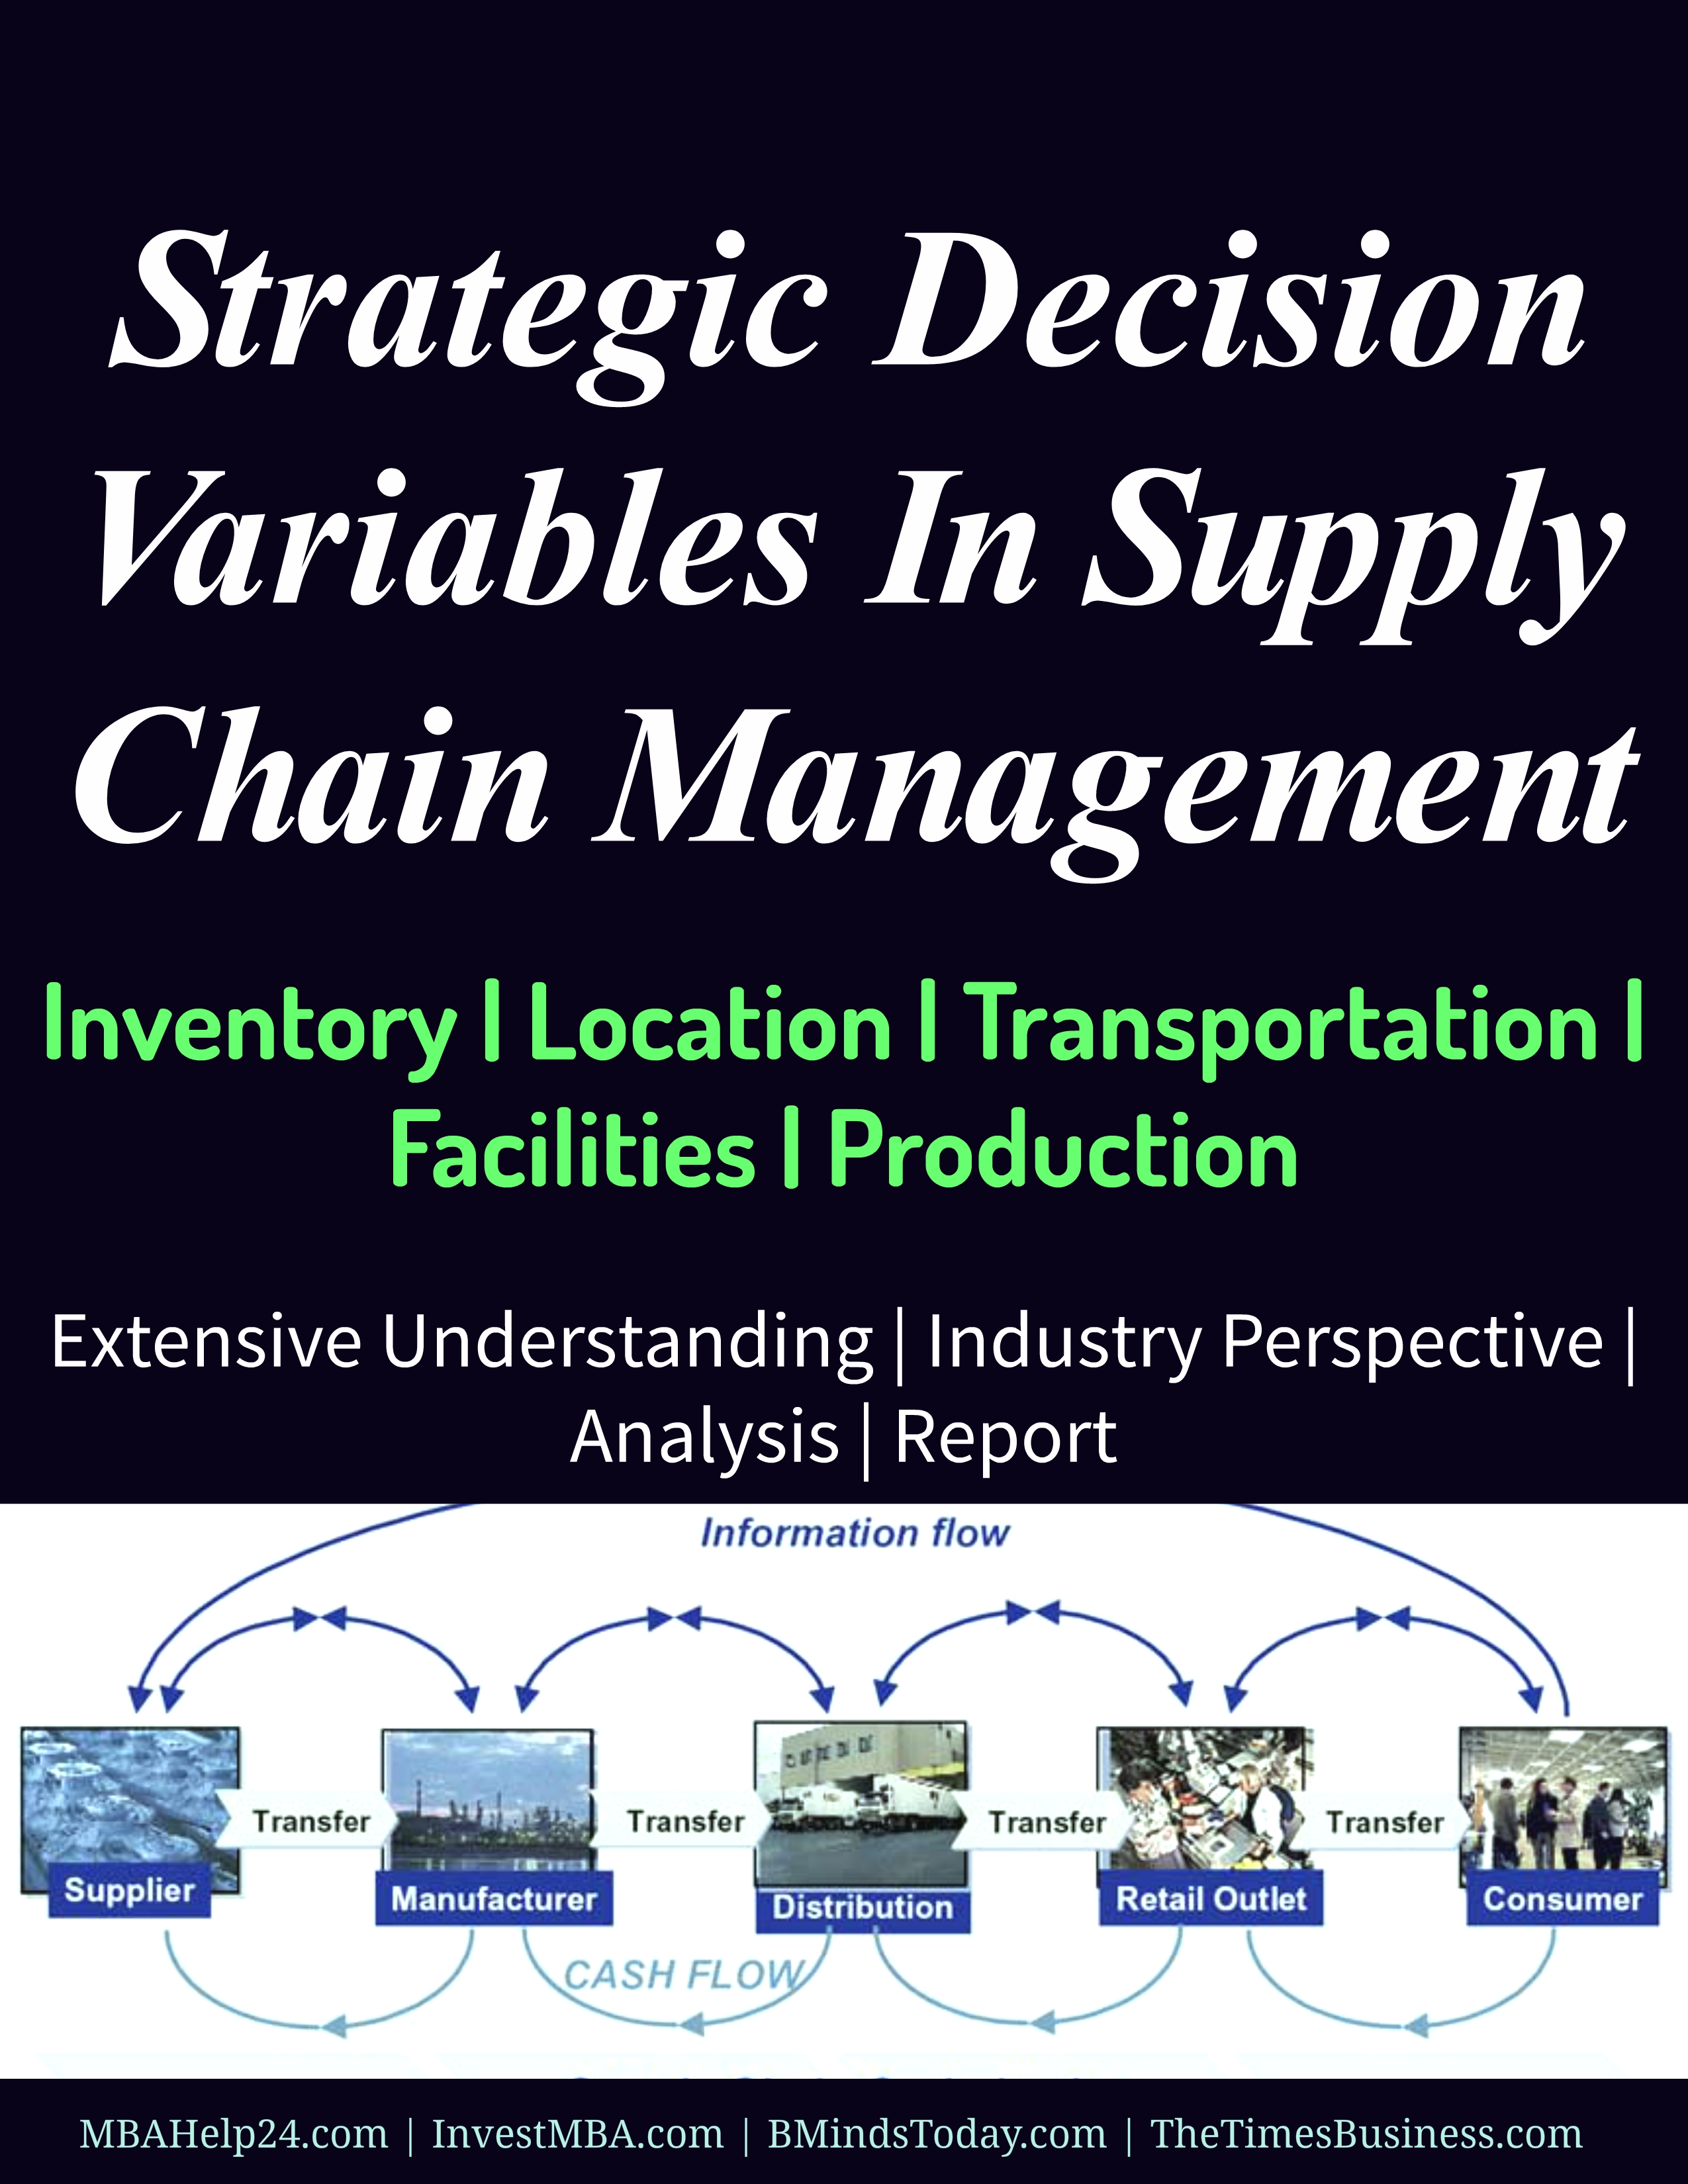 Strategic Decision Variables In Supply Chain Management-Inventory, Transportation, Facilities  supply chain Strategic Decision Variables In Supply Chain Management | Inventory | Transportation | Facilities Strategic Decision Variables In Supply Chain Management Inventory Transportation Facilities